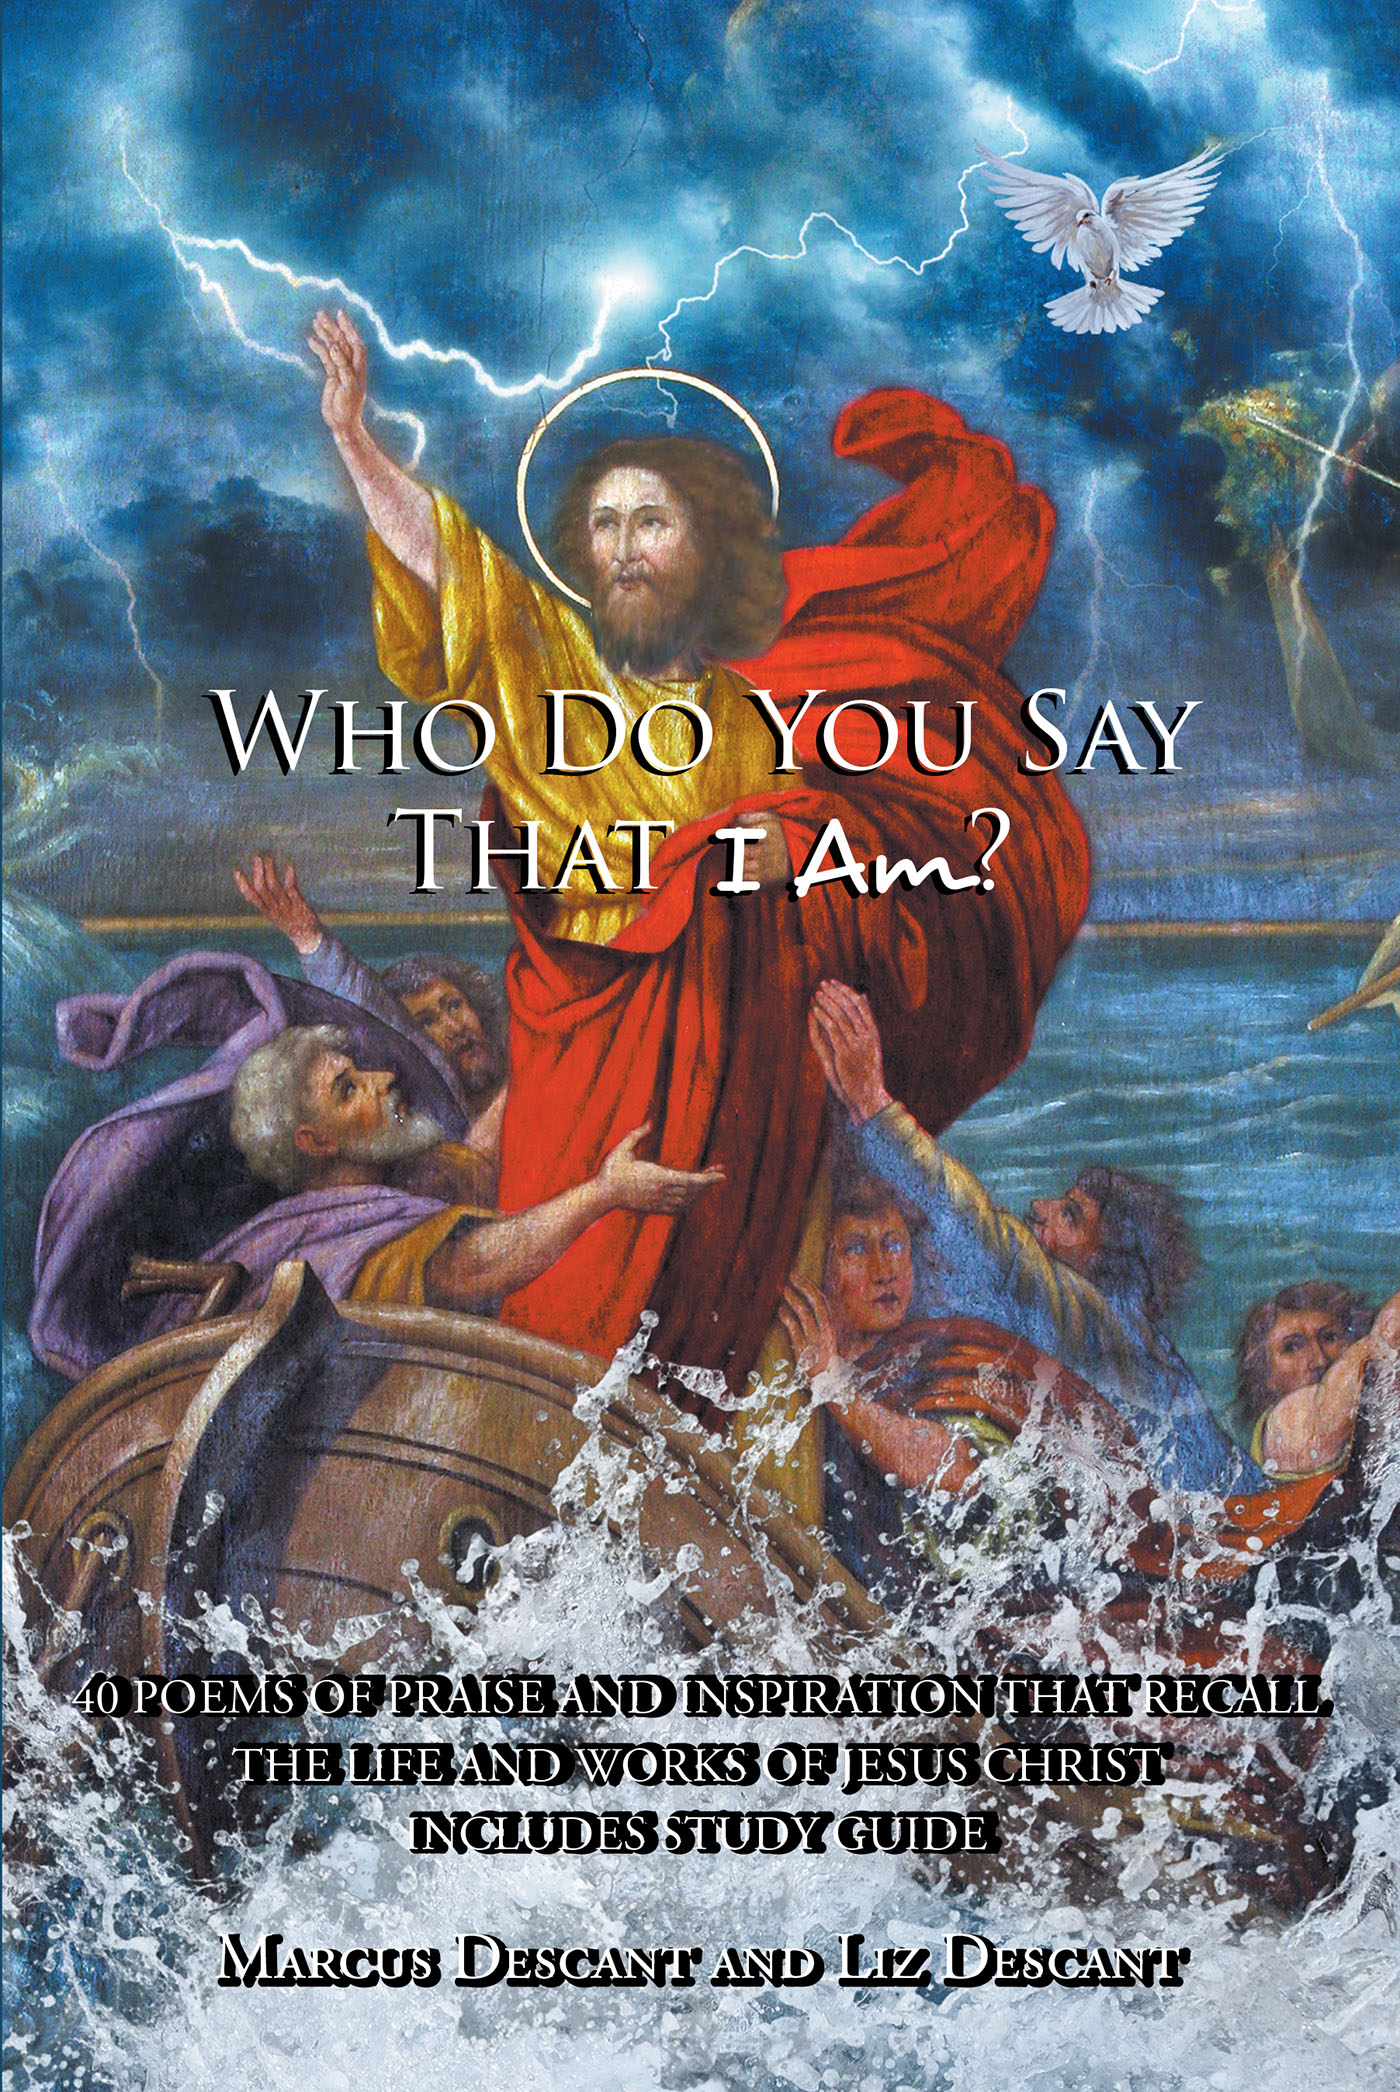 Author Marcus Descant and Liz Descant’s New Book, "Who Do You Say That I Am? 40 Poems of Praise and Inspiration," is an Easy-to-Read Book of Christian Poetry